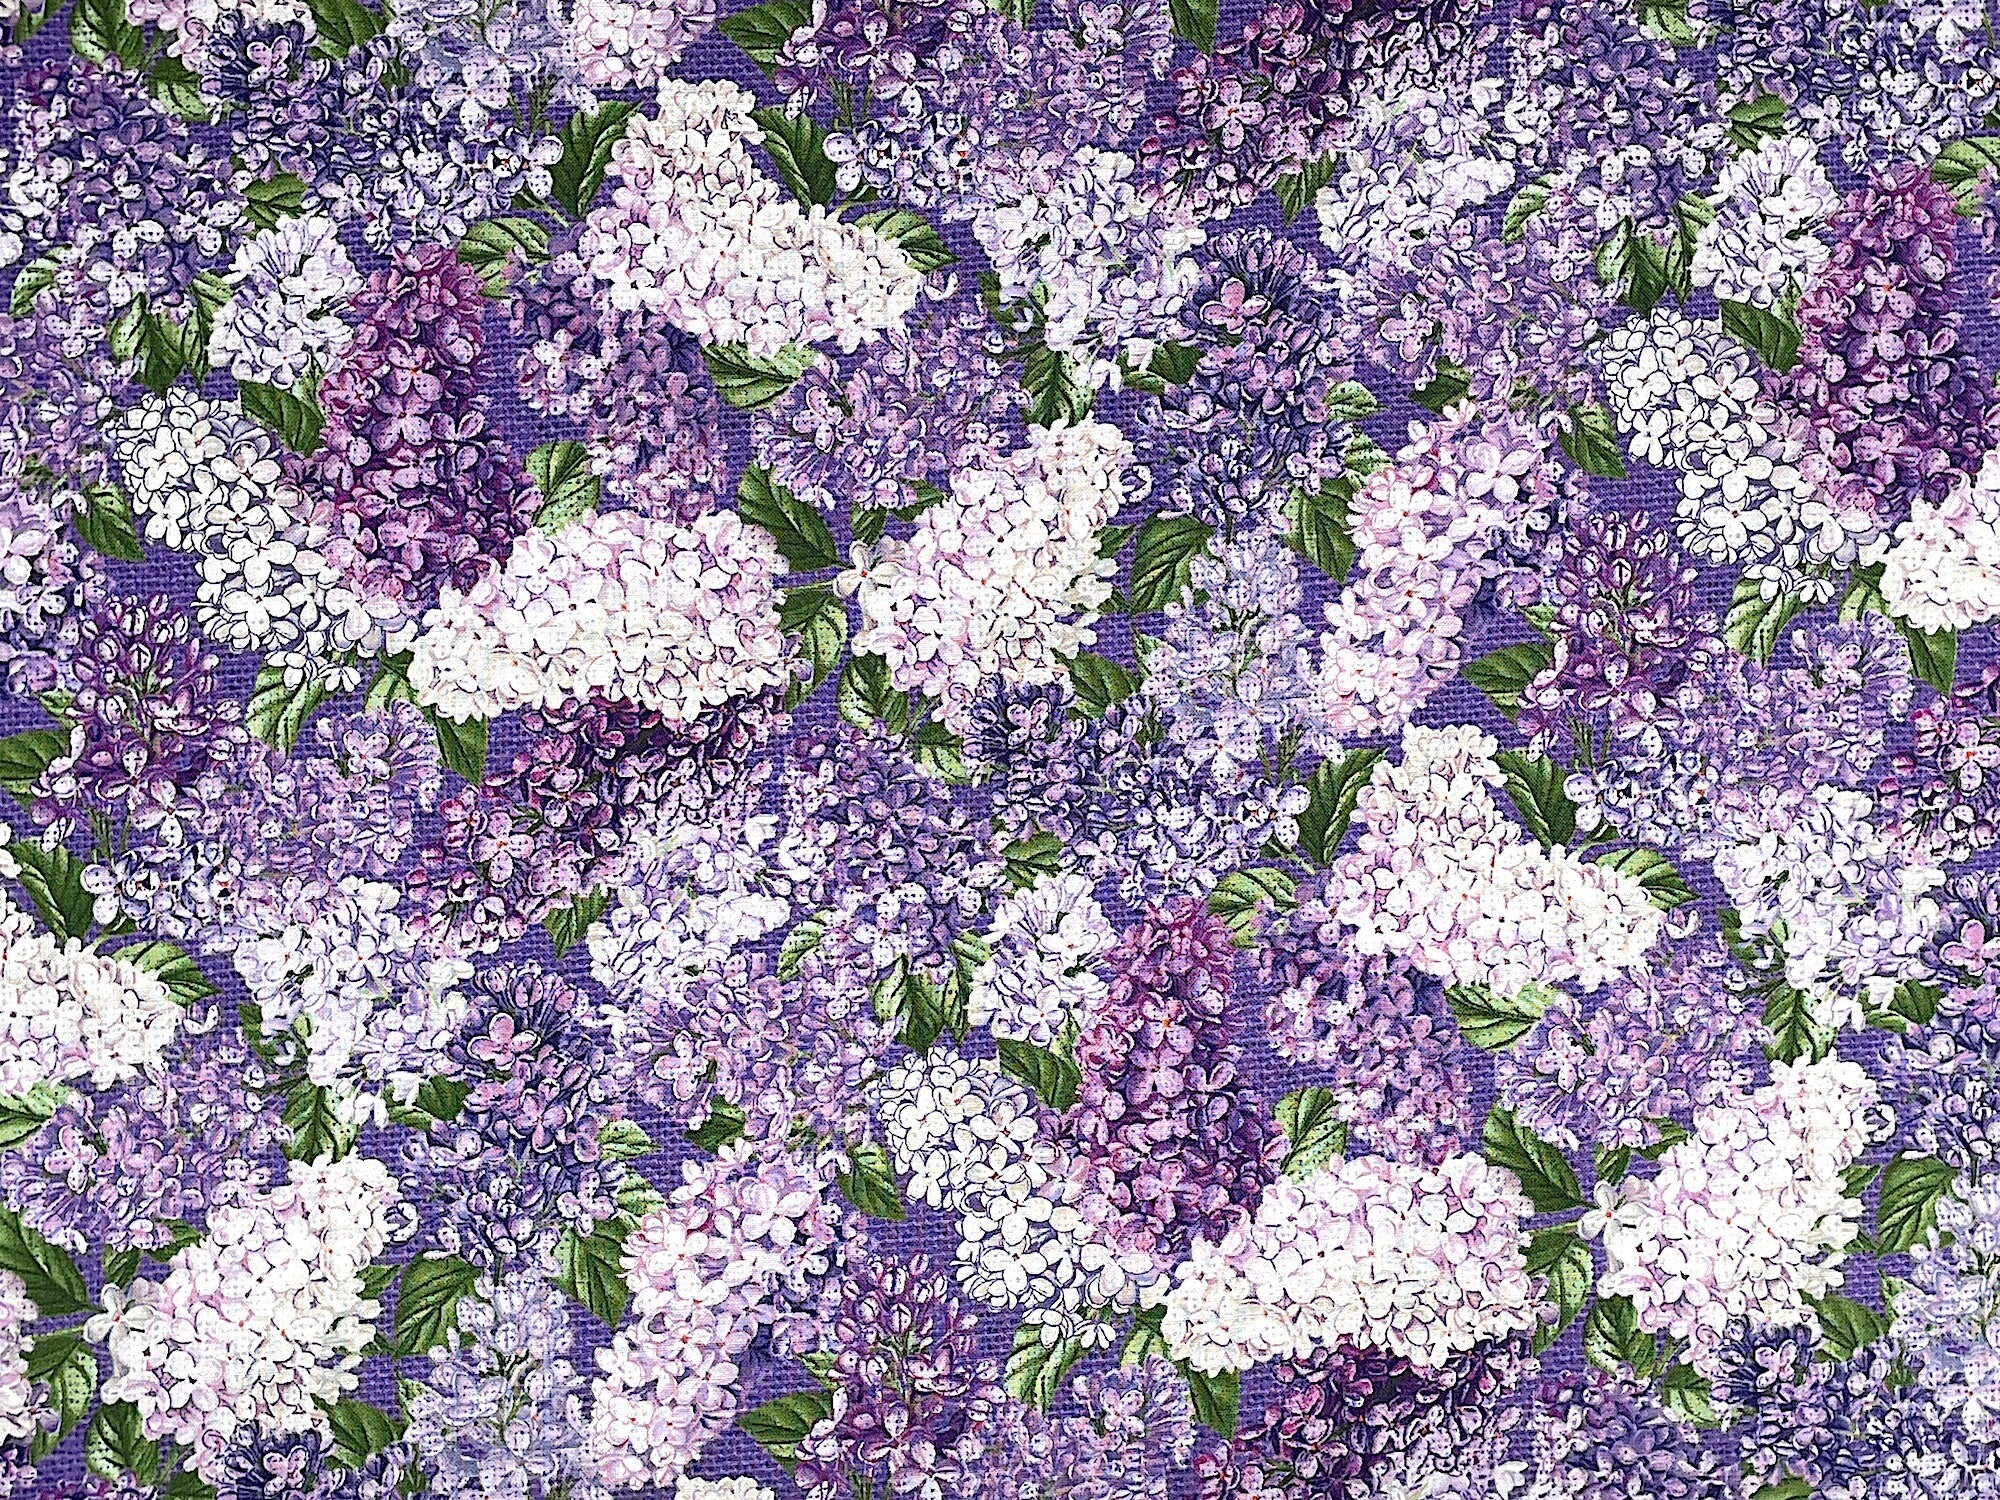 Purple cotton fabric covered with lilacs that are shades of purple and white.